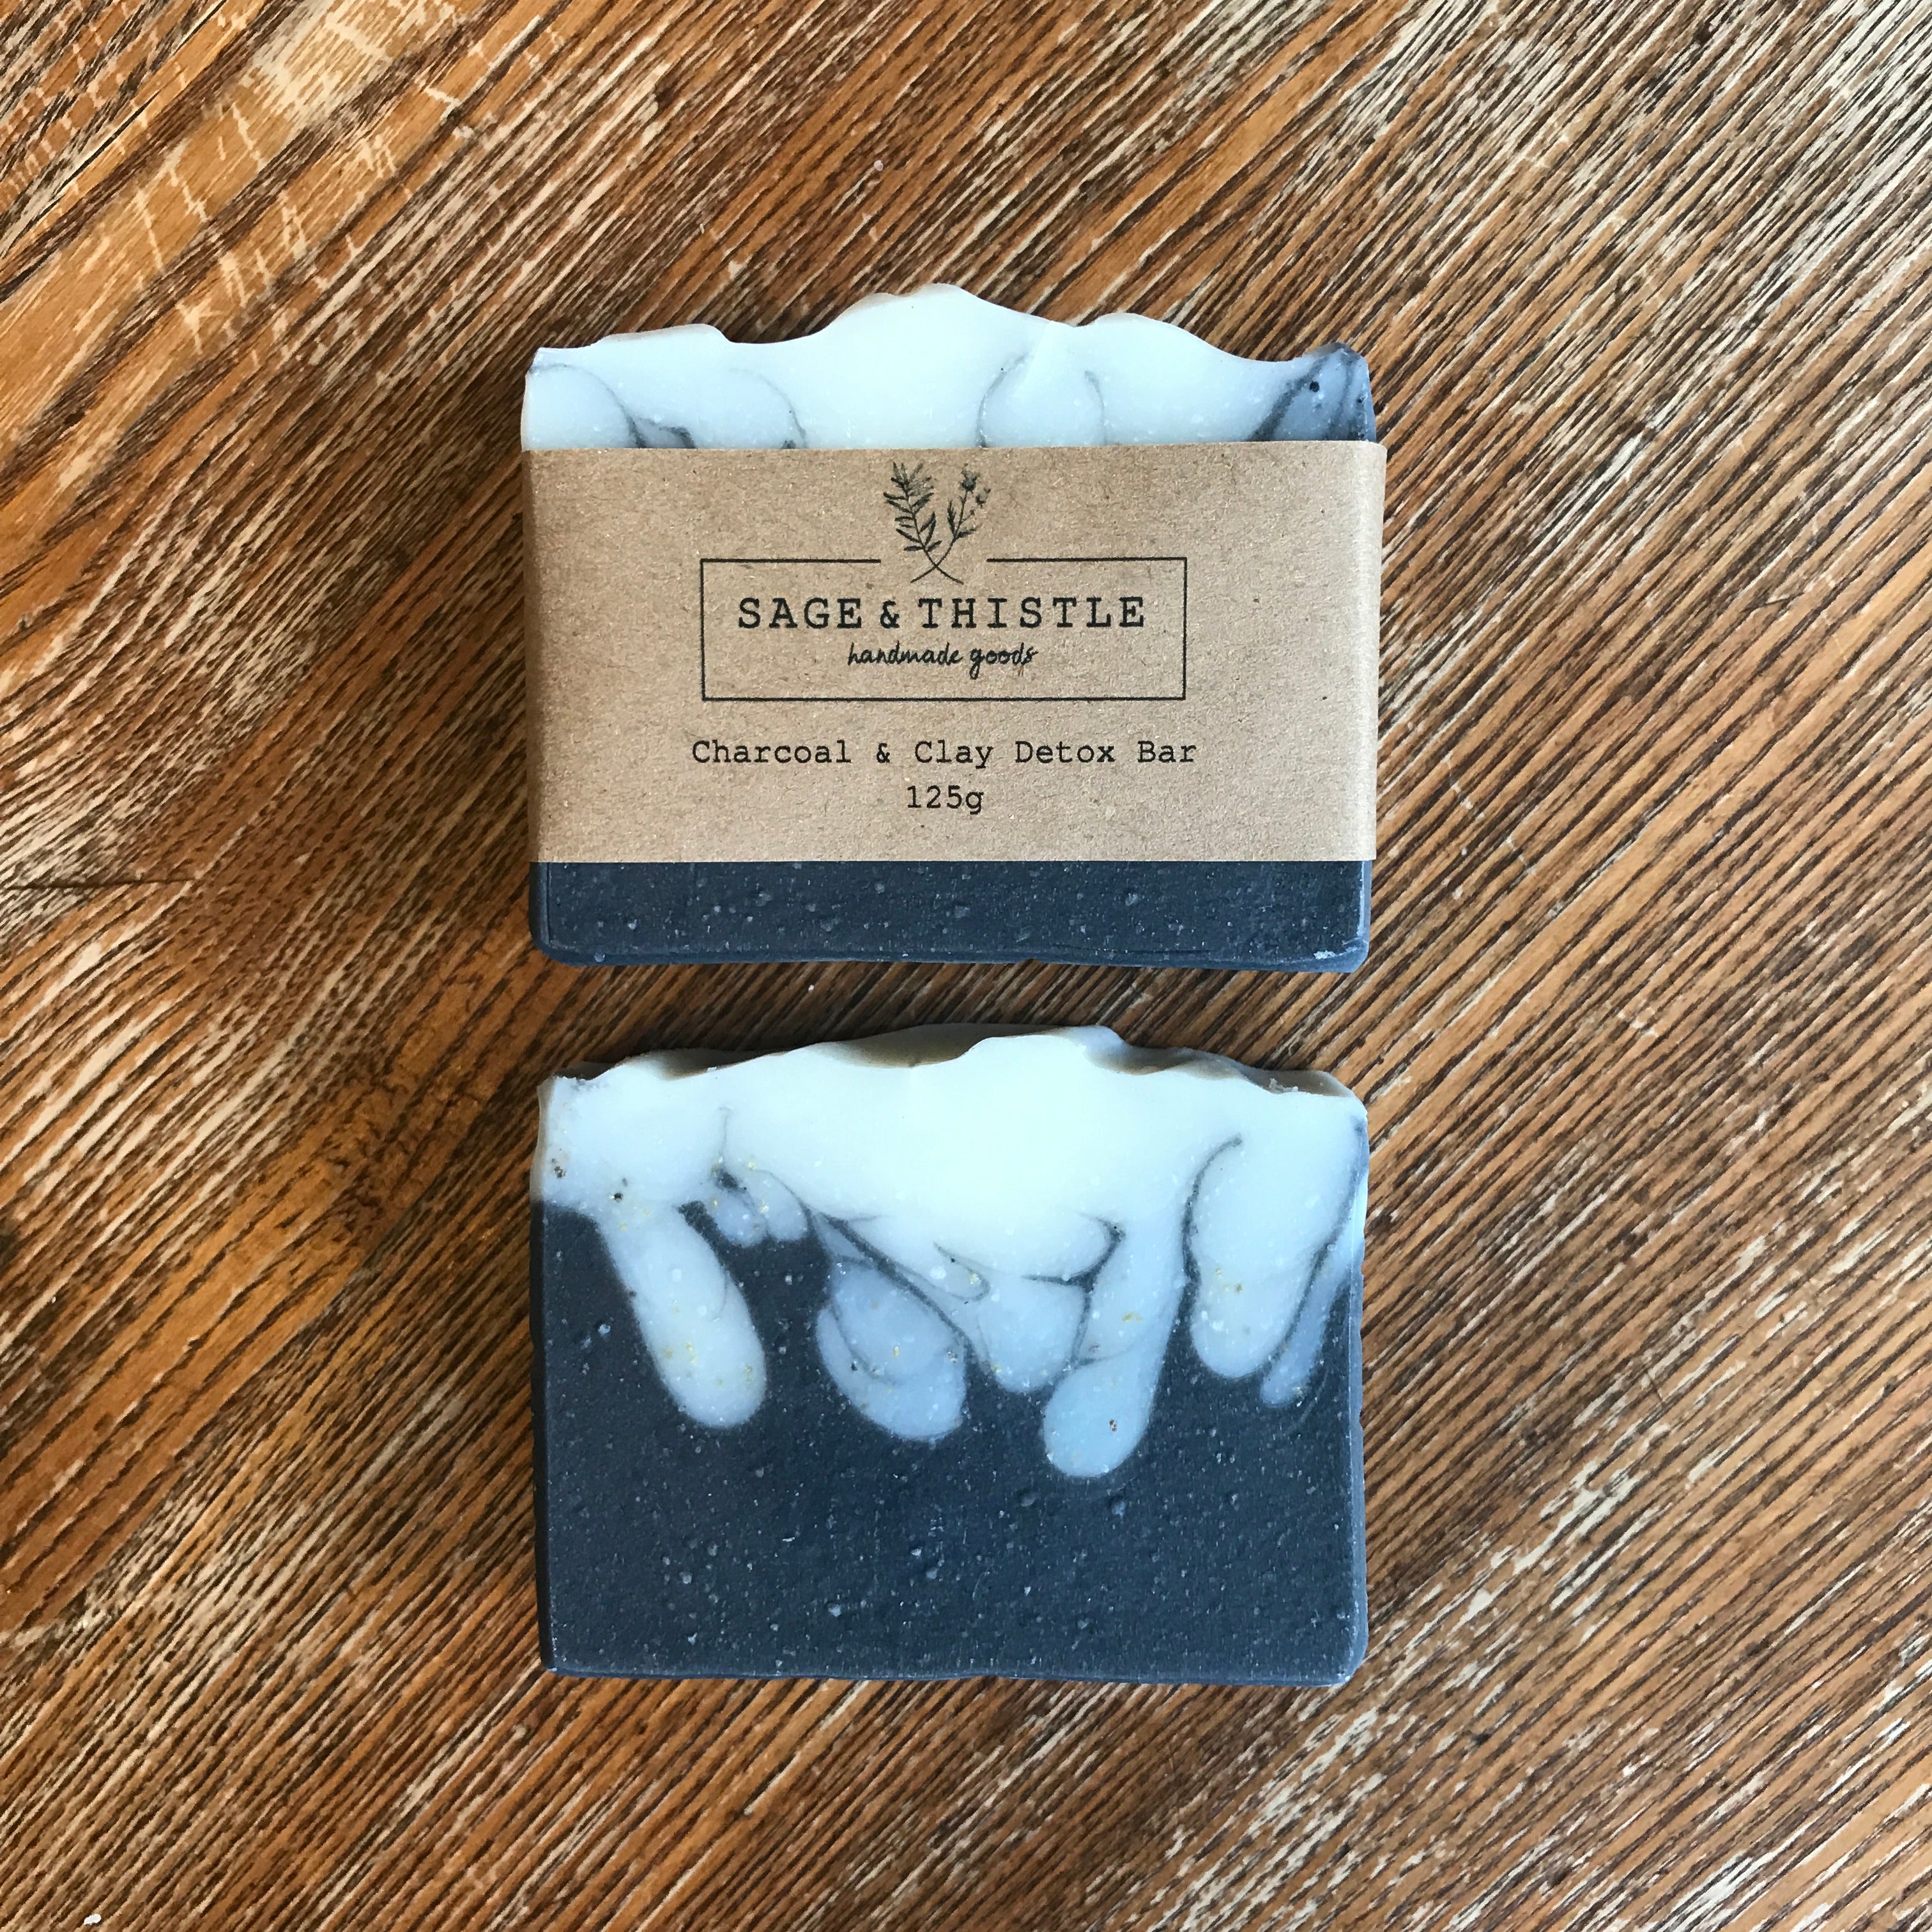 Natural Bar Soap made with Activated Charcoal and Tea Tree oil. Great for acne-prone & oily skin.